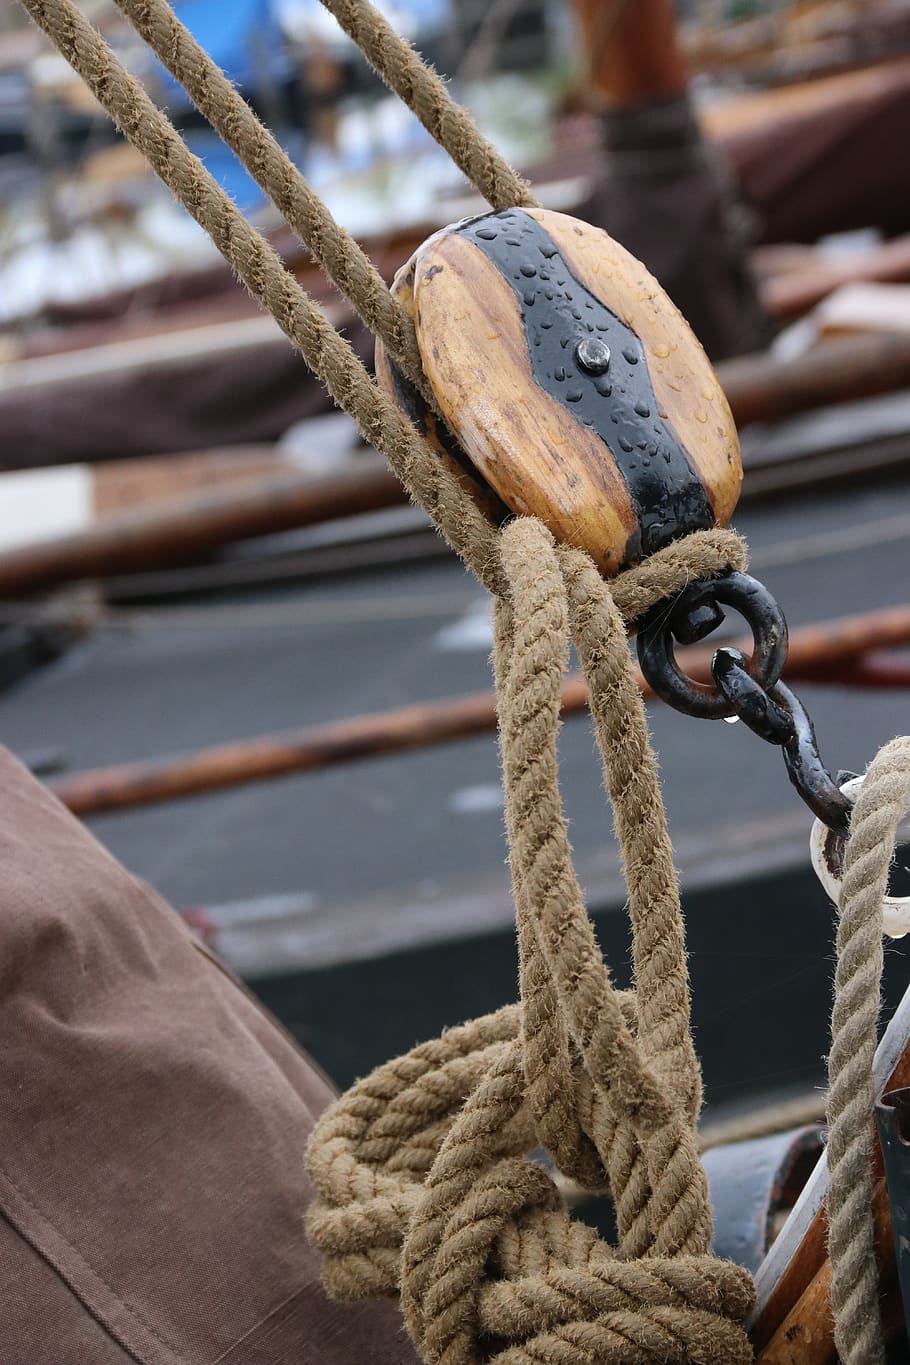 netherlands, elburg, botter, pulley, boat, sailing, traditional, strength, rope, tied up